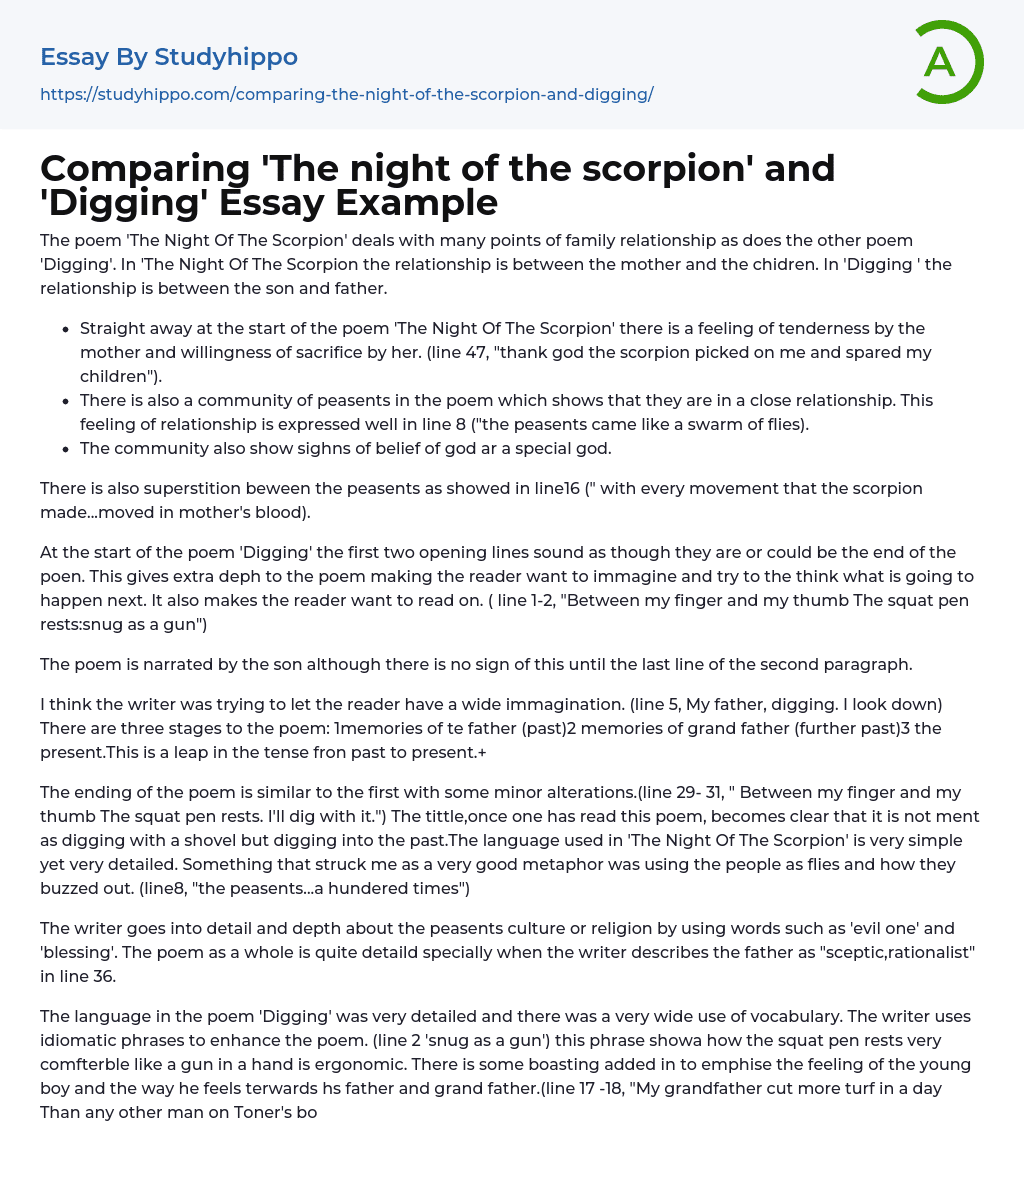 Comparing ‘The night of the scorpion’ and ‘Digging’ Essay Example